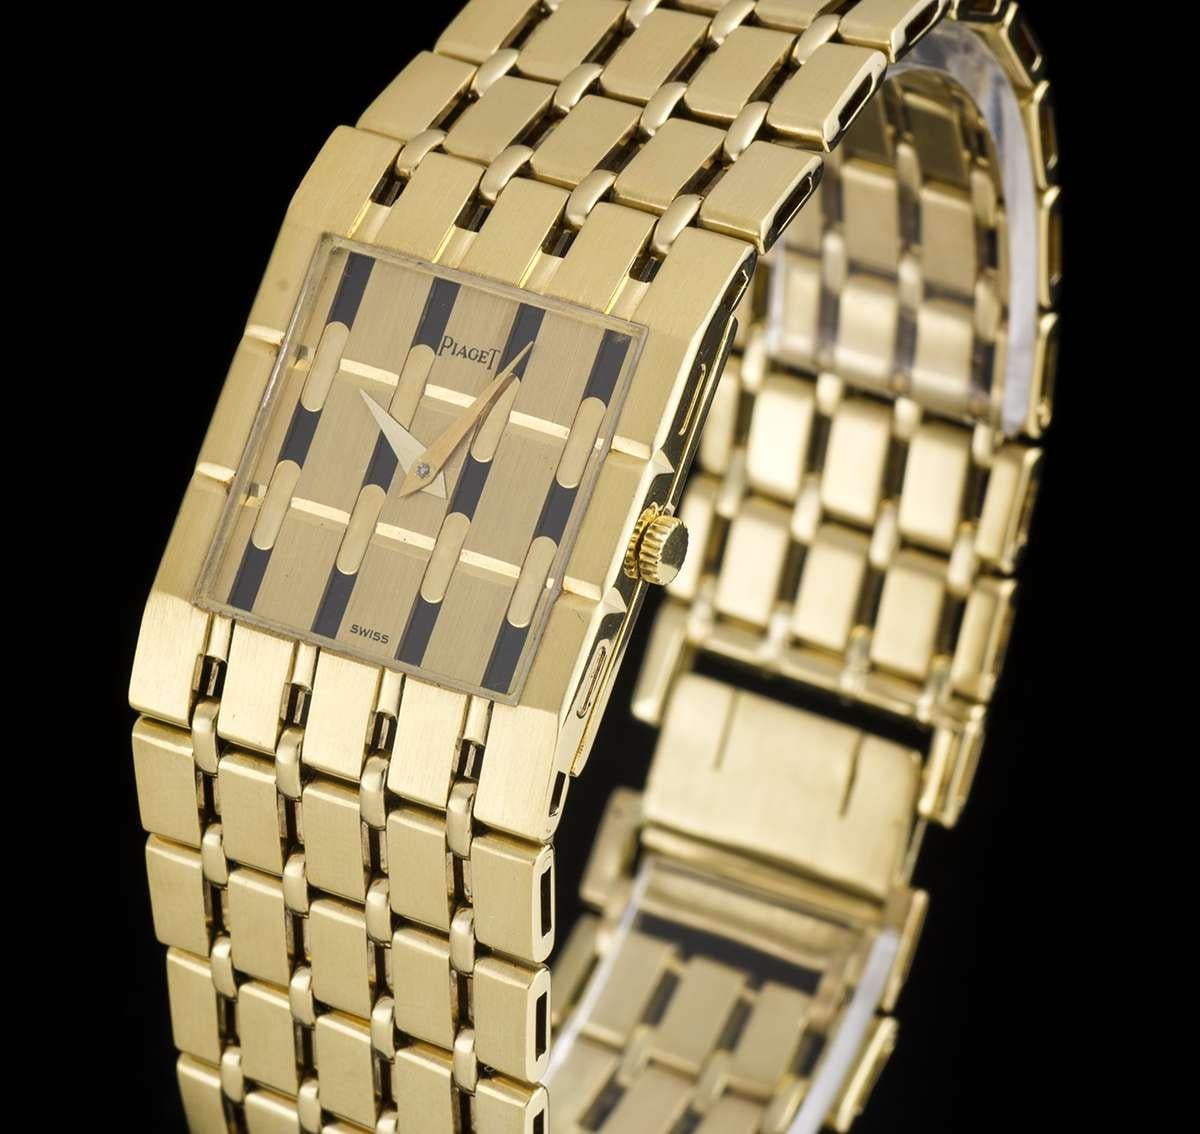 A 23 mm 18k Yellow Gold Polo Gents Dress Wristwatch, champagne dial, a fixed 18k yellow gold bezel, an 18k yellow gold bracelet with an 18k yellow gold jewellery style clasp, mineral glass, manual wind movement, in excellent condition, comes with a